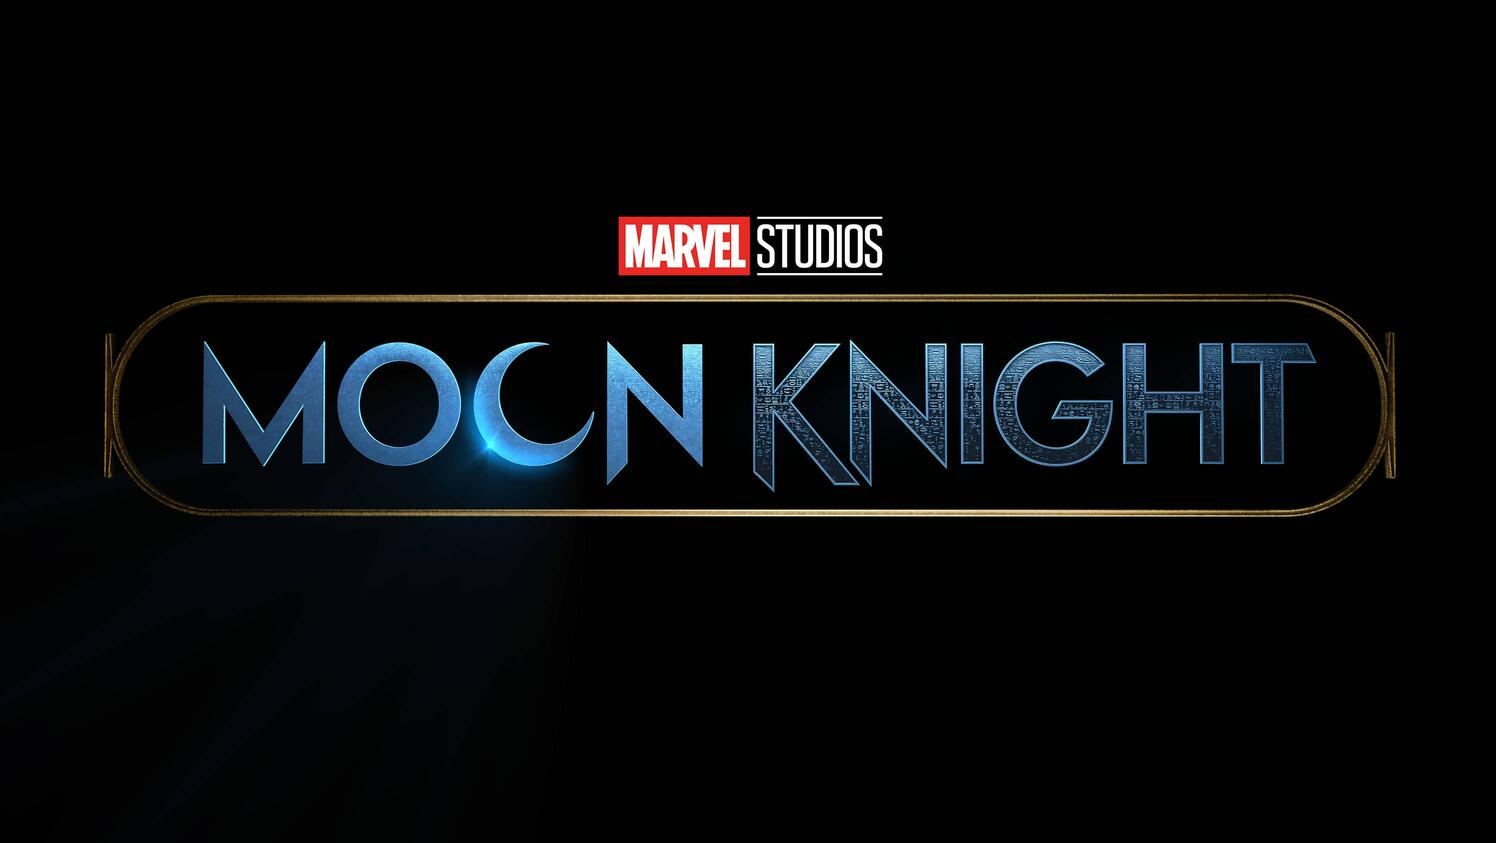 For Moon Knight, coming from Marvel Studios.  (Image: Marvel Studios)